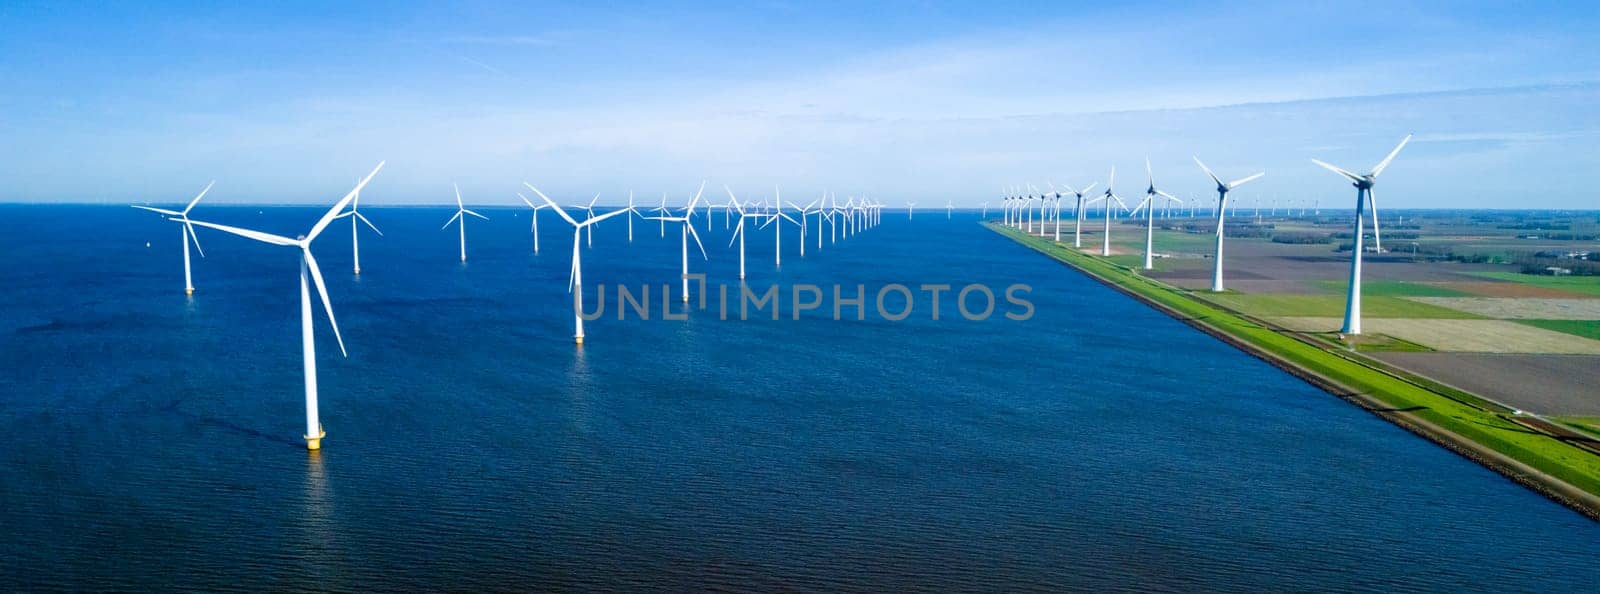 A picturesque scene of numerous windmills scattered across a vast body of water ocean by fokkebok